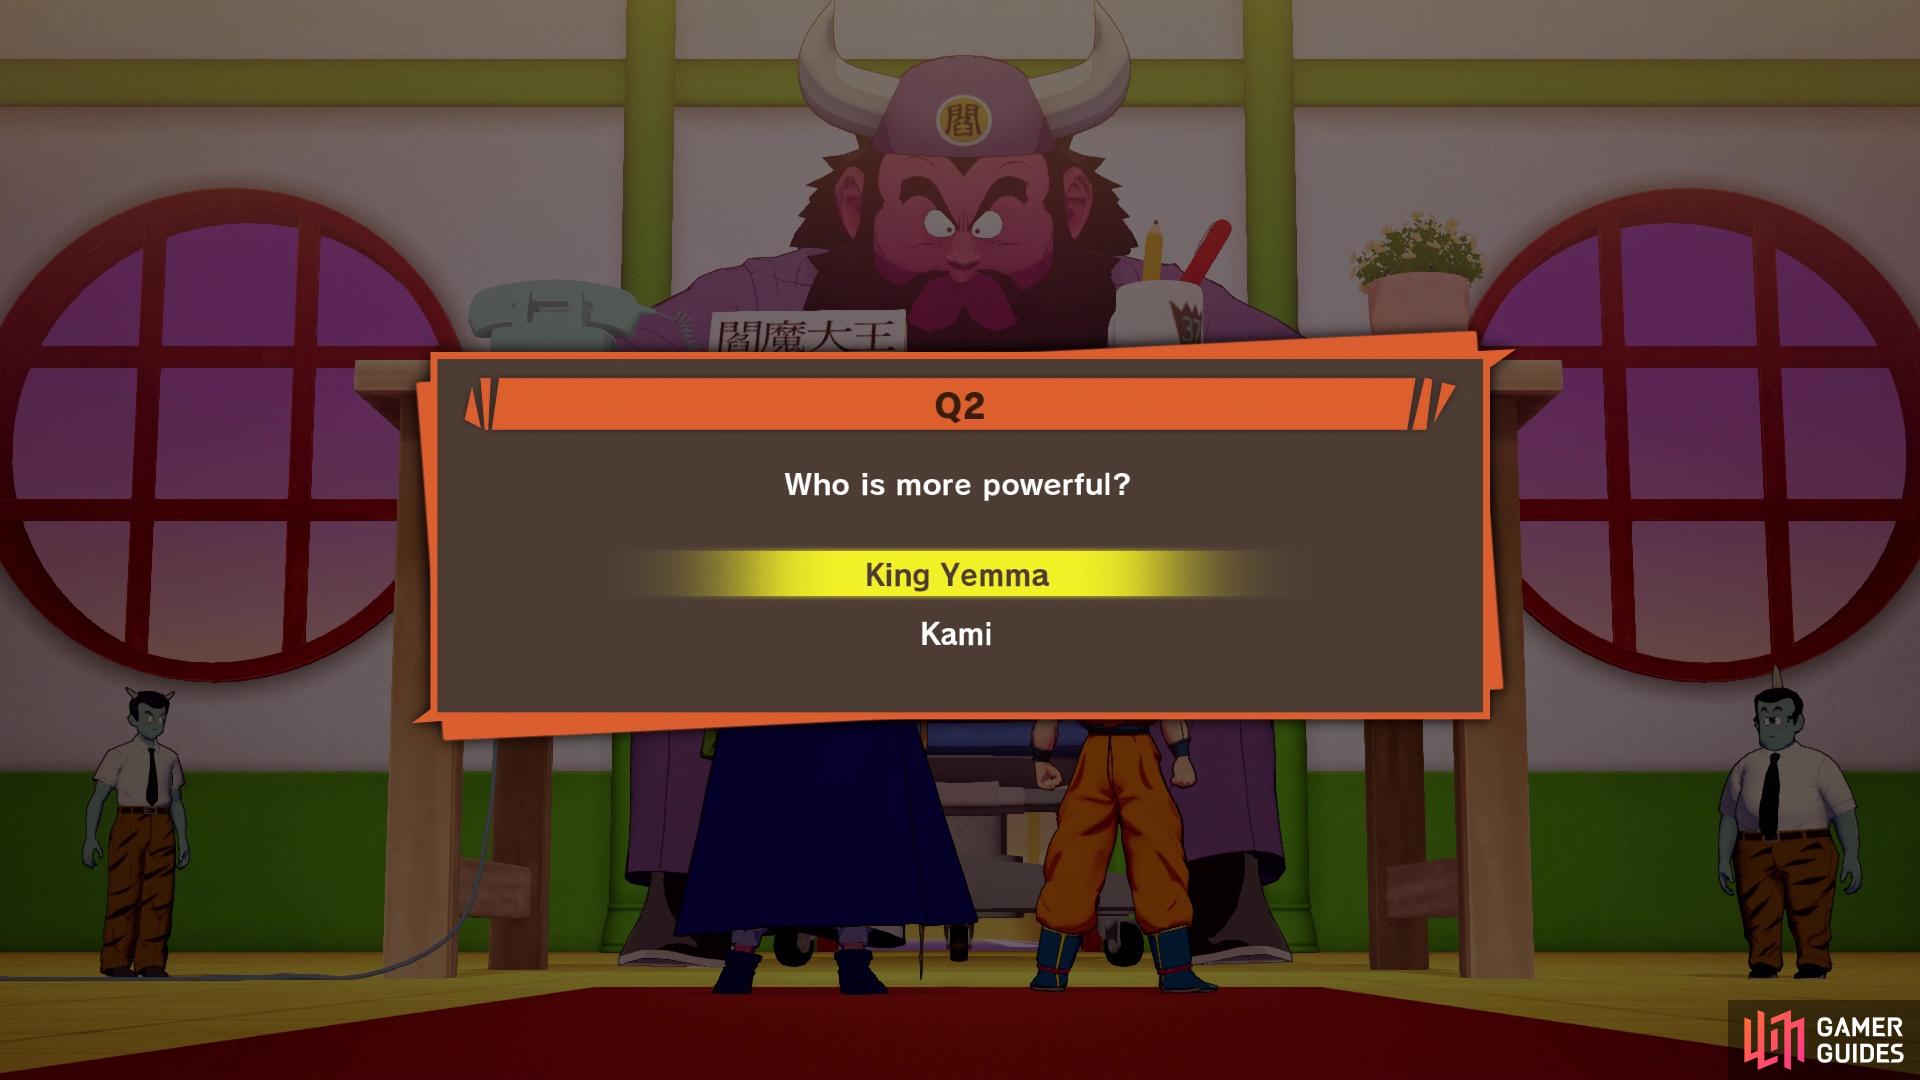 King Yemma will test you by asking you some quiz questions